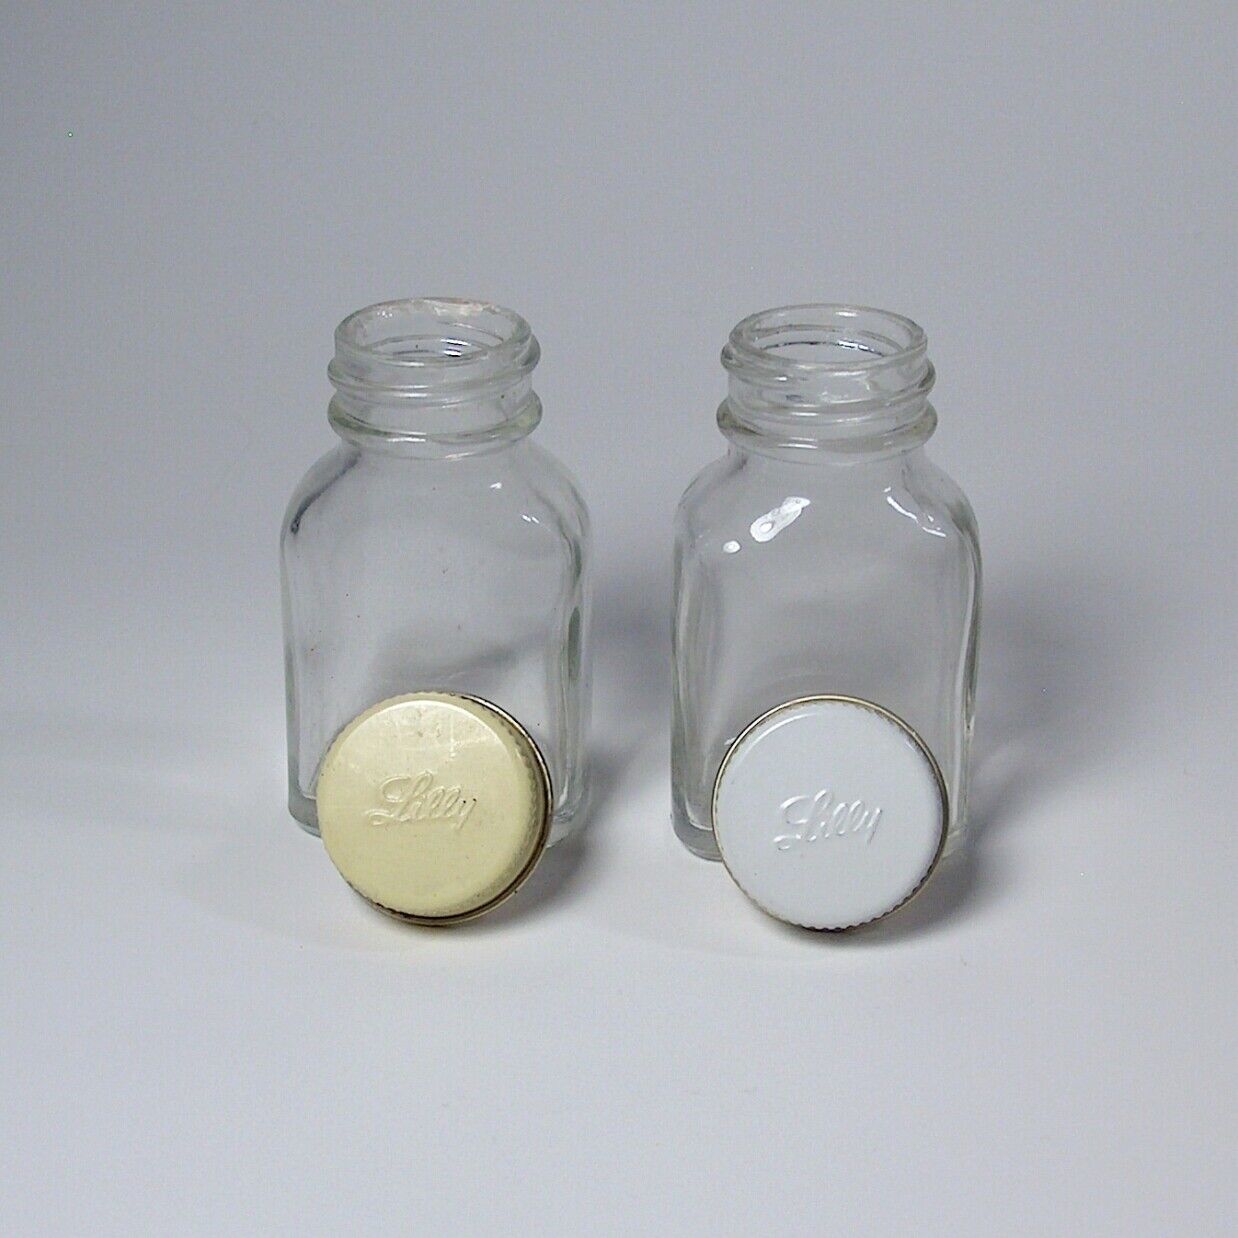 Vintage Medicine Bottles Eli Lilly Aspirin Small Mini Clear Colored Lids 2.5 In